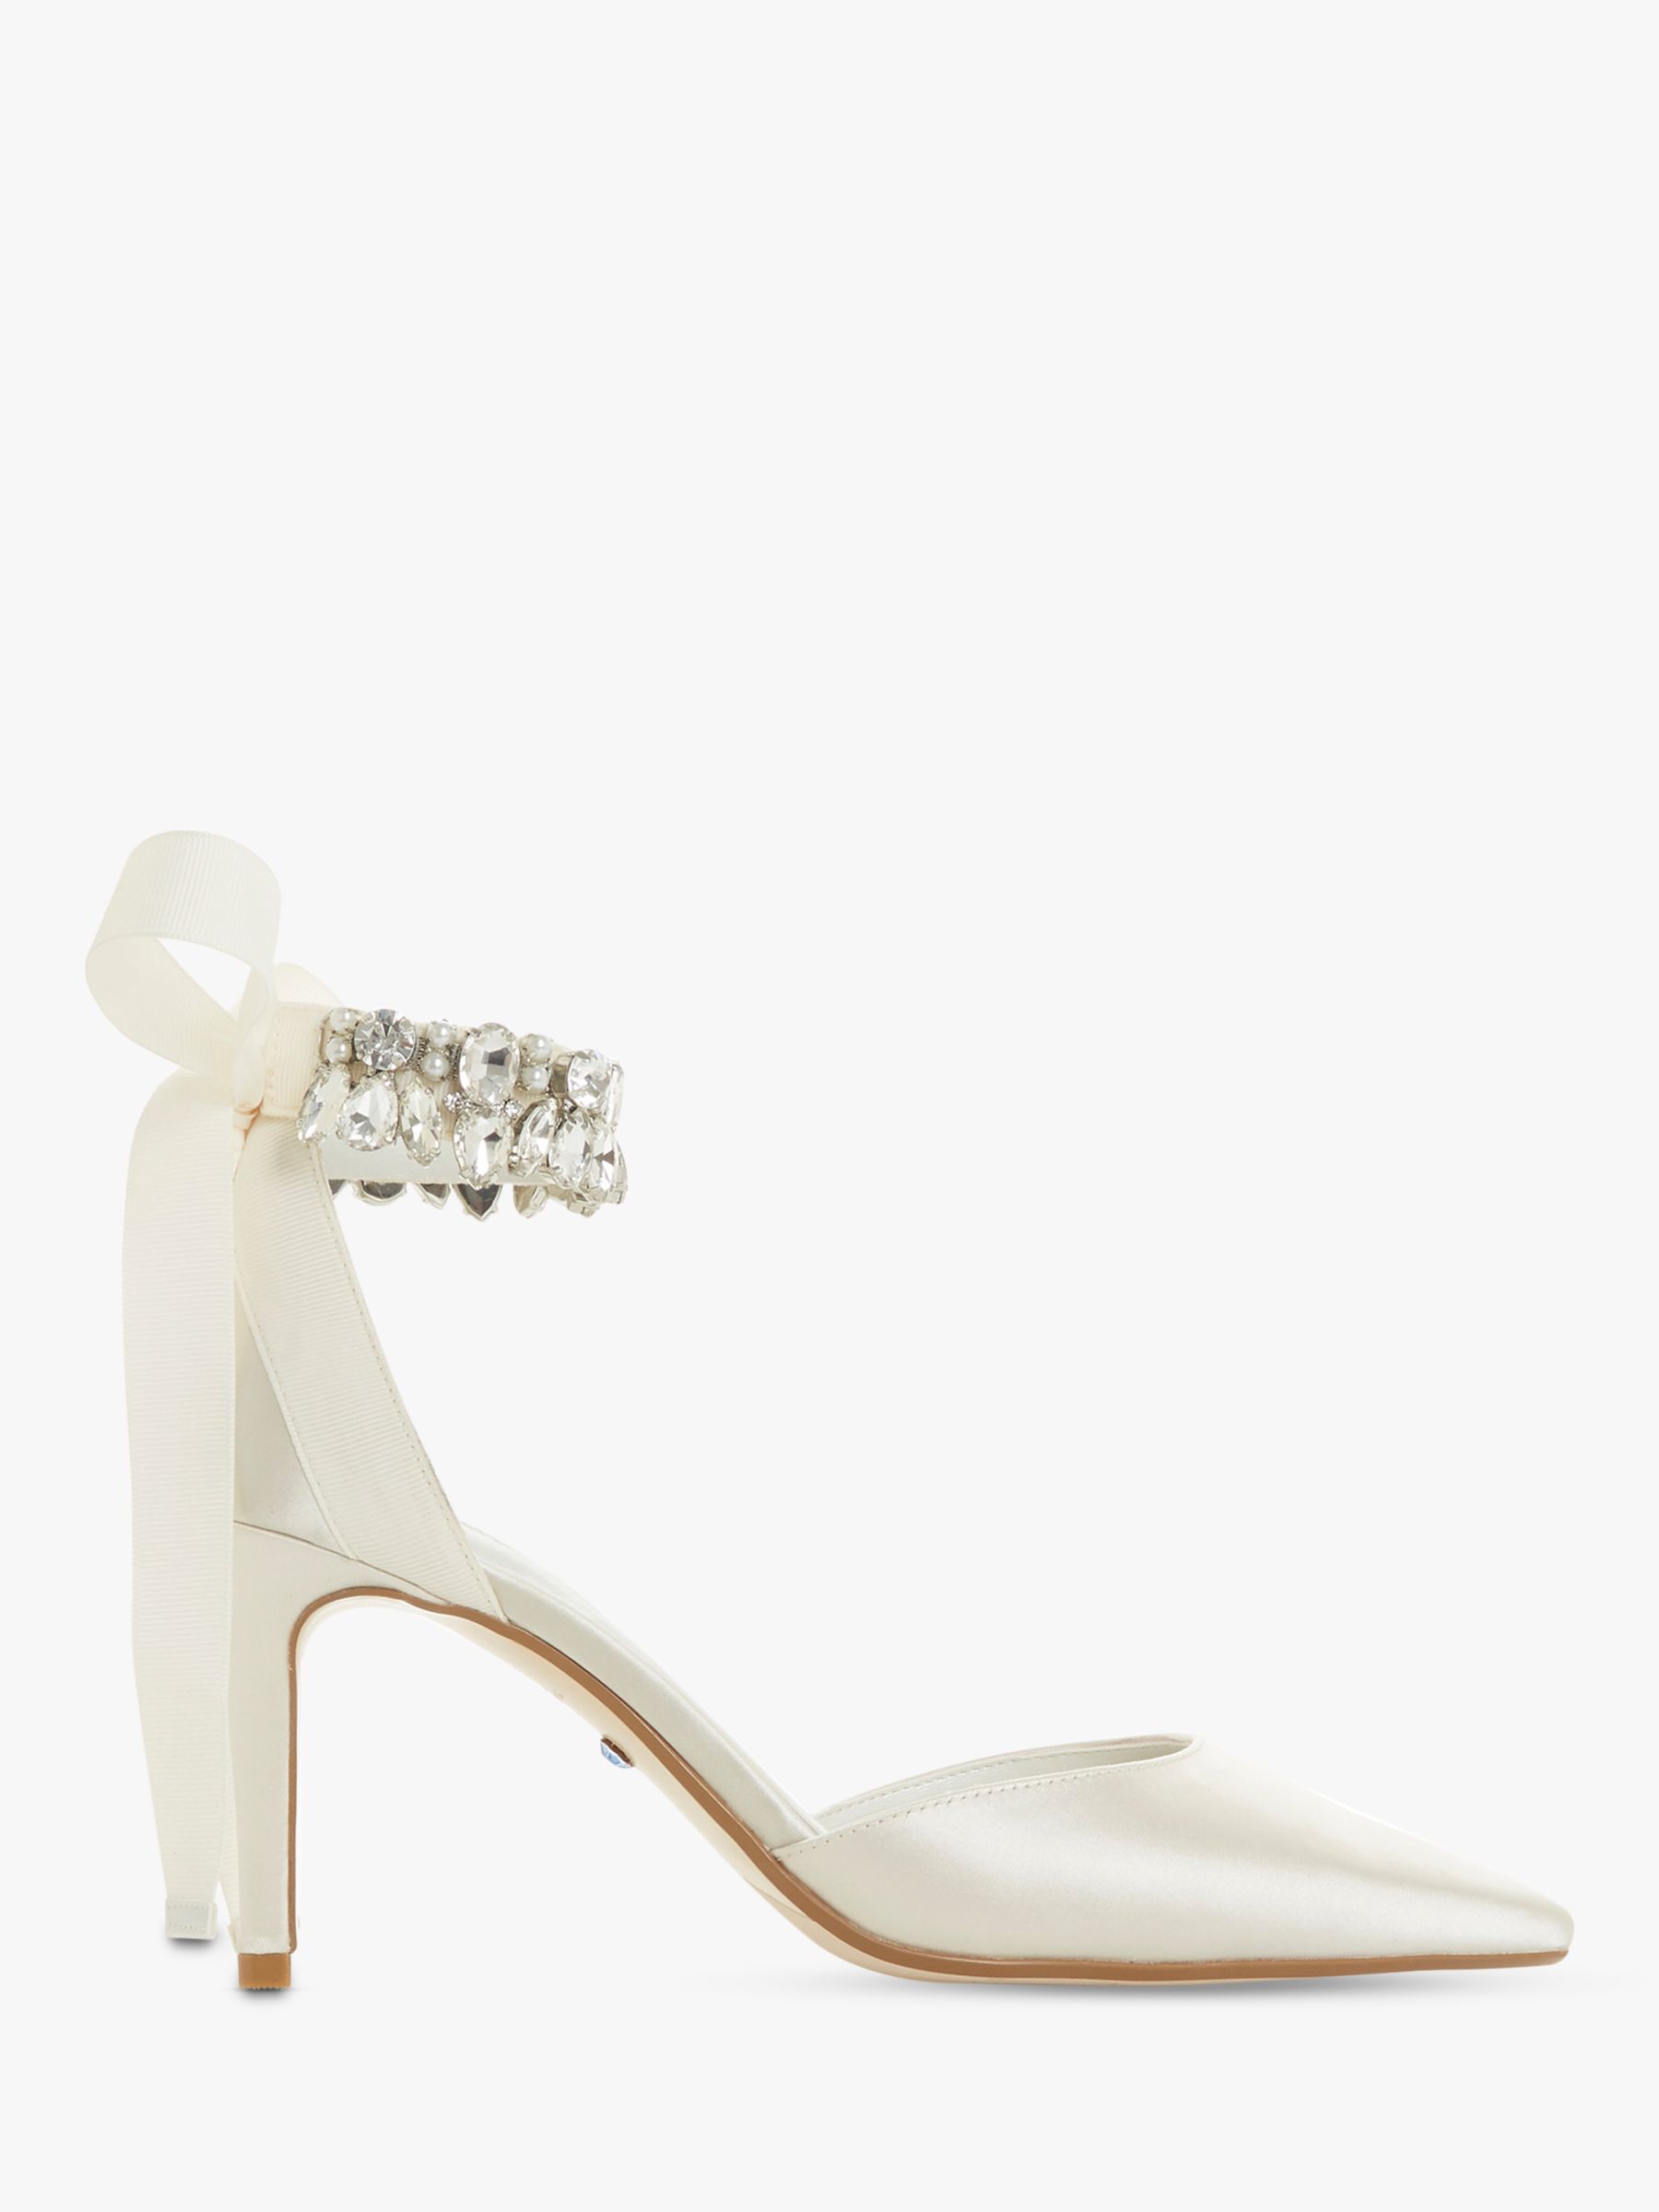 Dune Church Bridal Collection Stiletto Heel Court Shoes, Ivory Satin